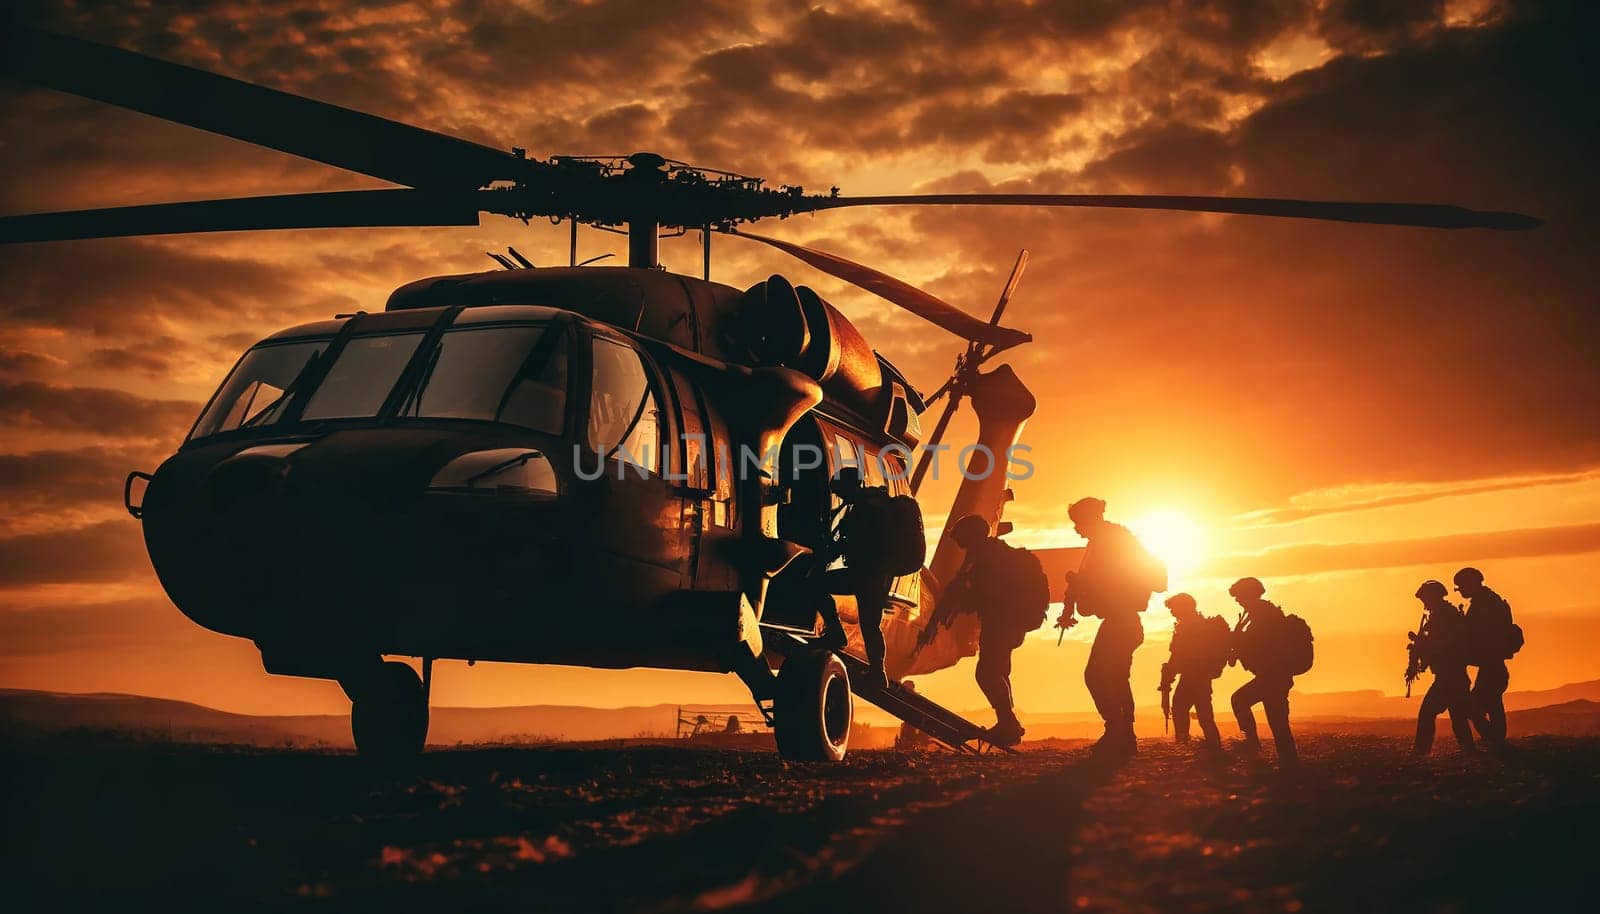 soldiers with machine guns board a helicopter at sunset.